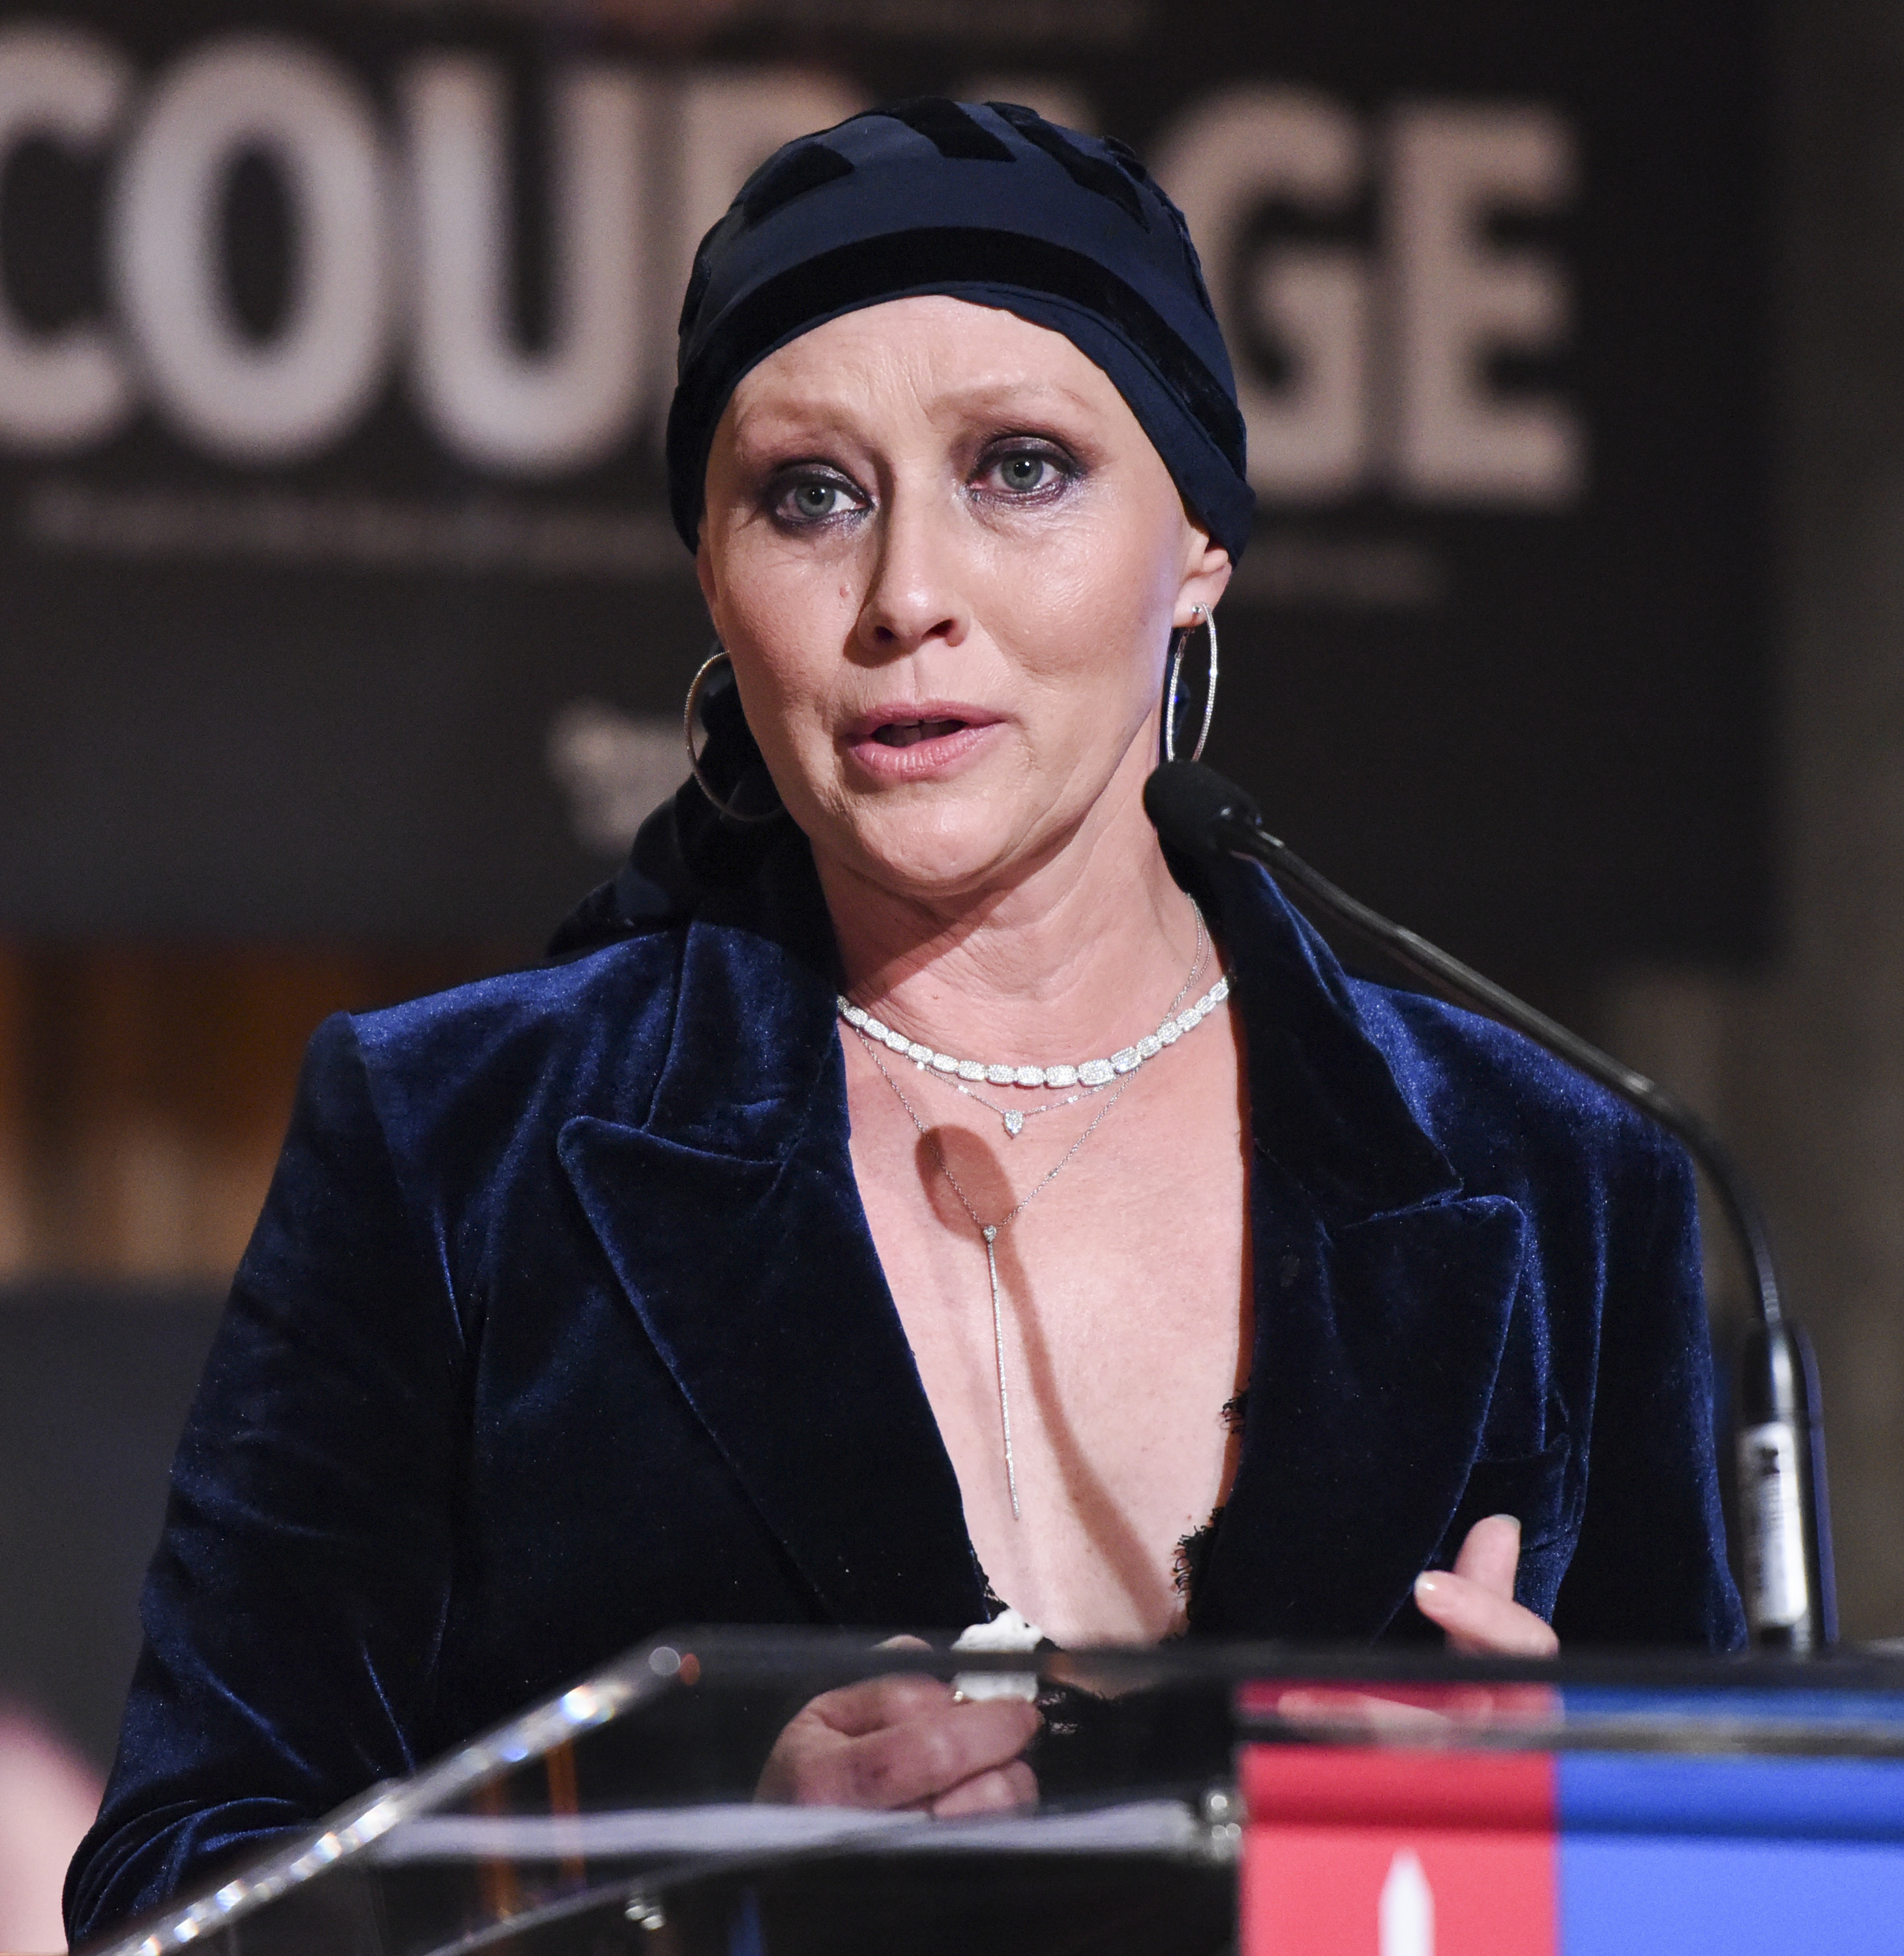 Shannen Doherty speaking at The American Cancer Society's Giants of Science Los Angeles Gala on November 5, 2016, in Los Angeles, California. | Source: Getty Images